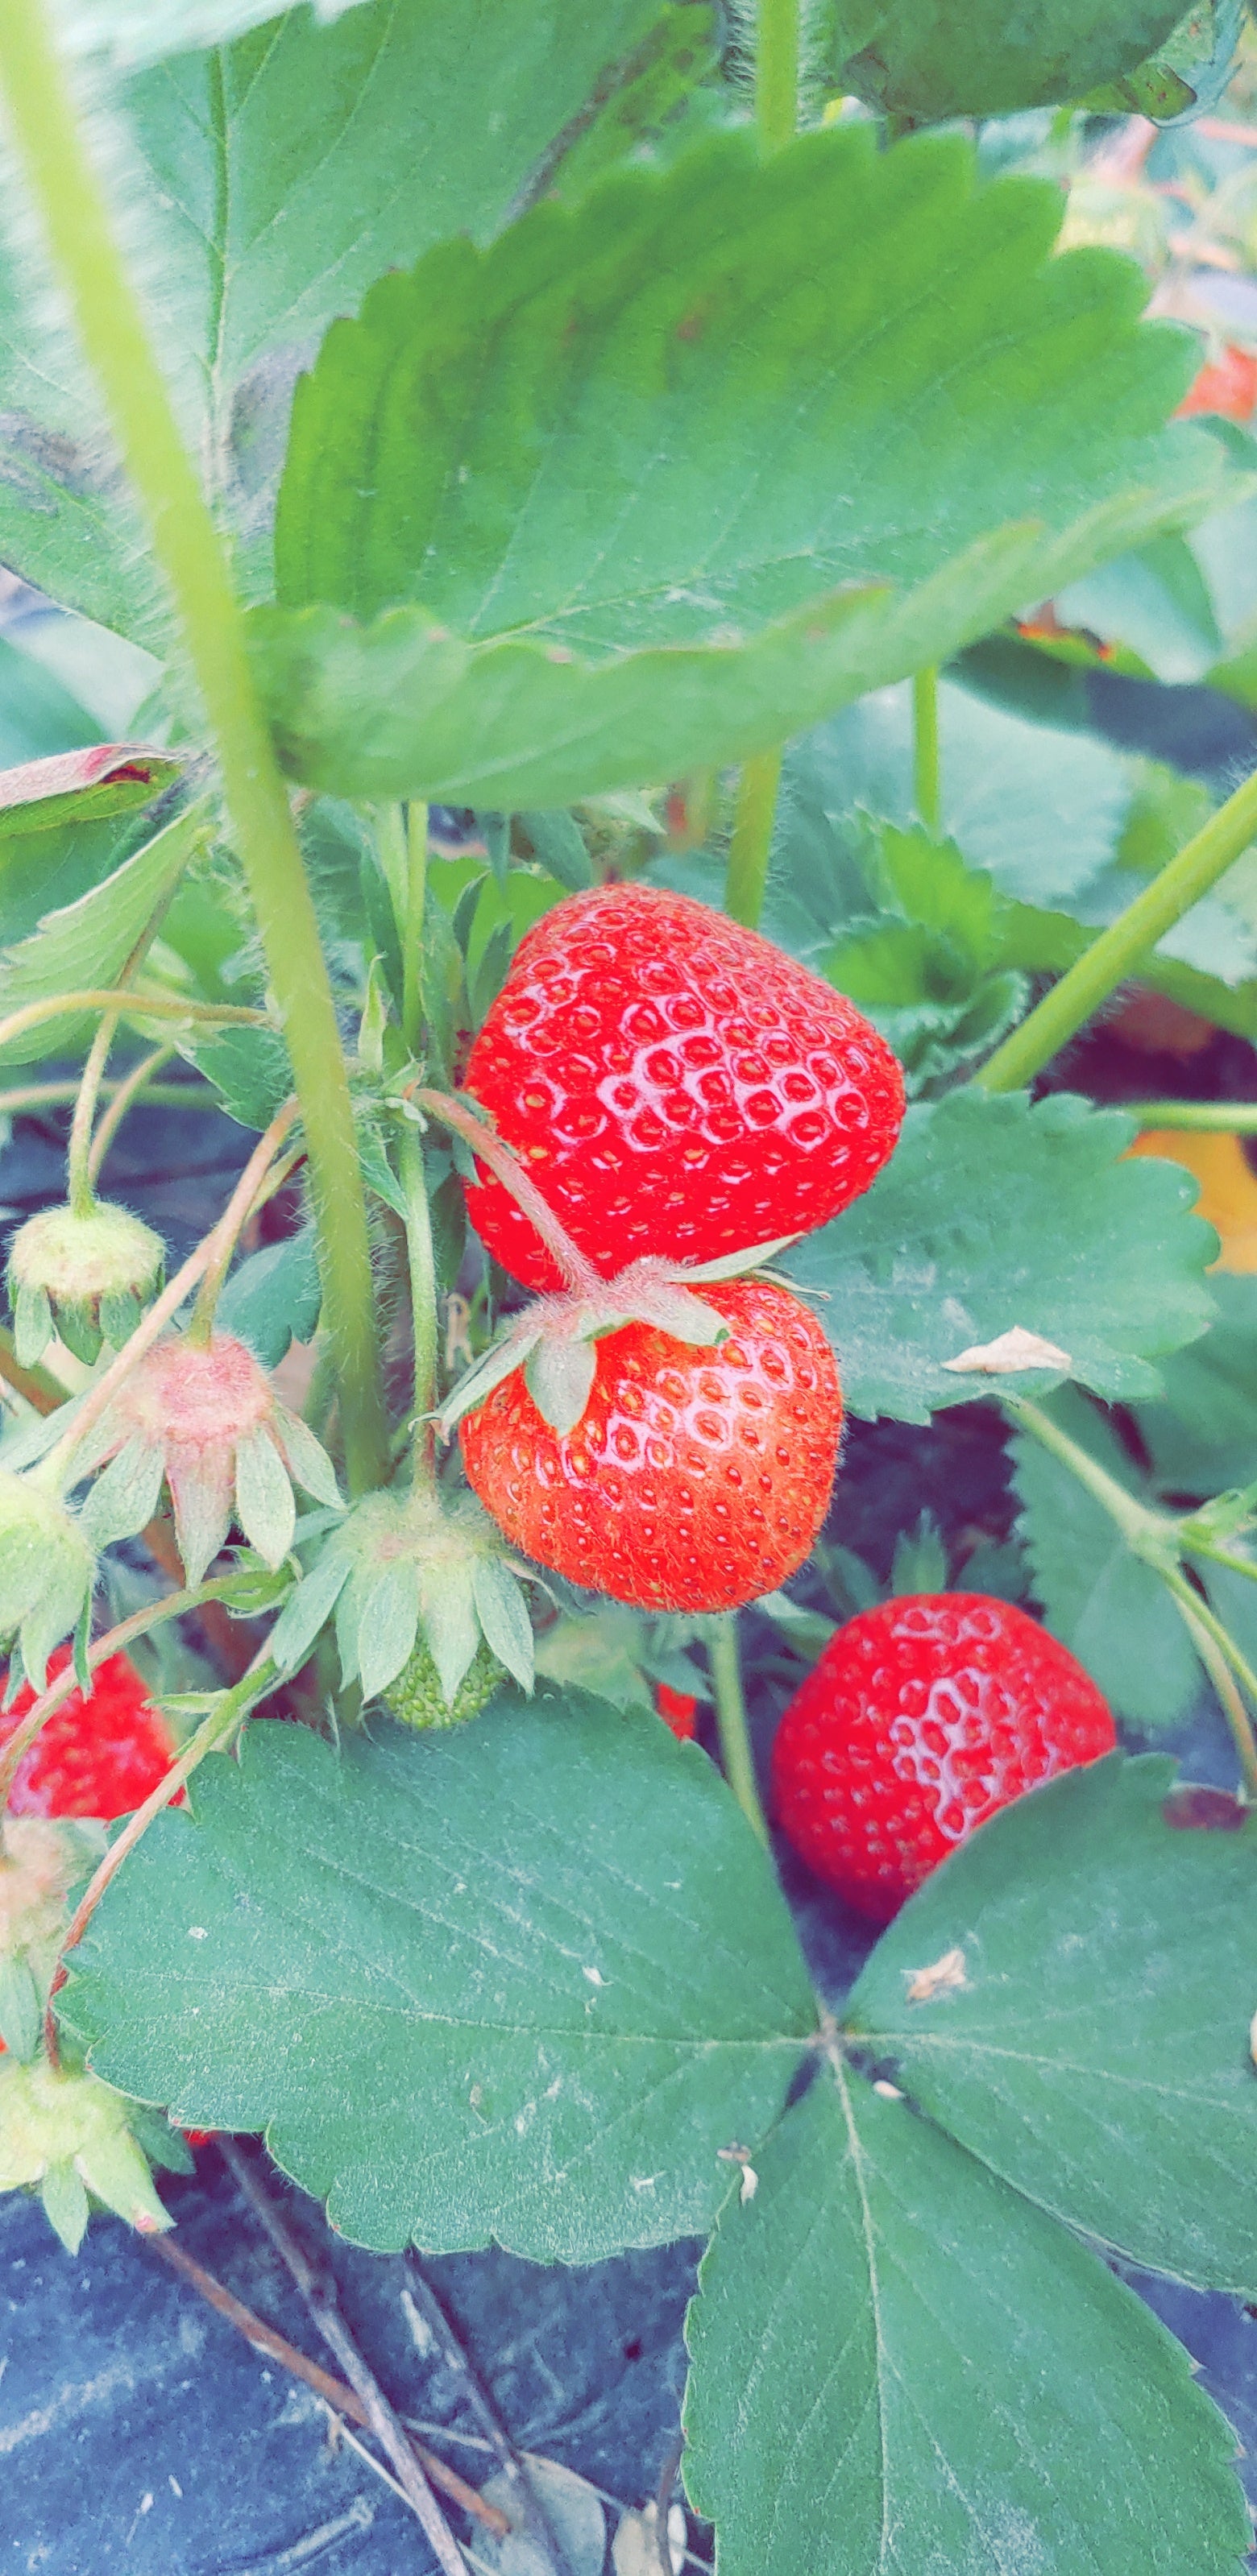 UPICK Strawberries Pre-pay FOR 5/25 only!!